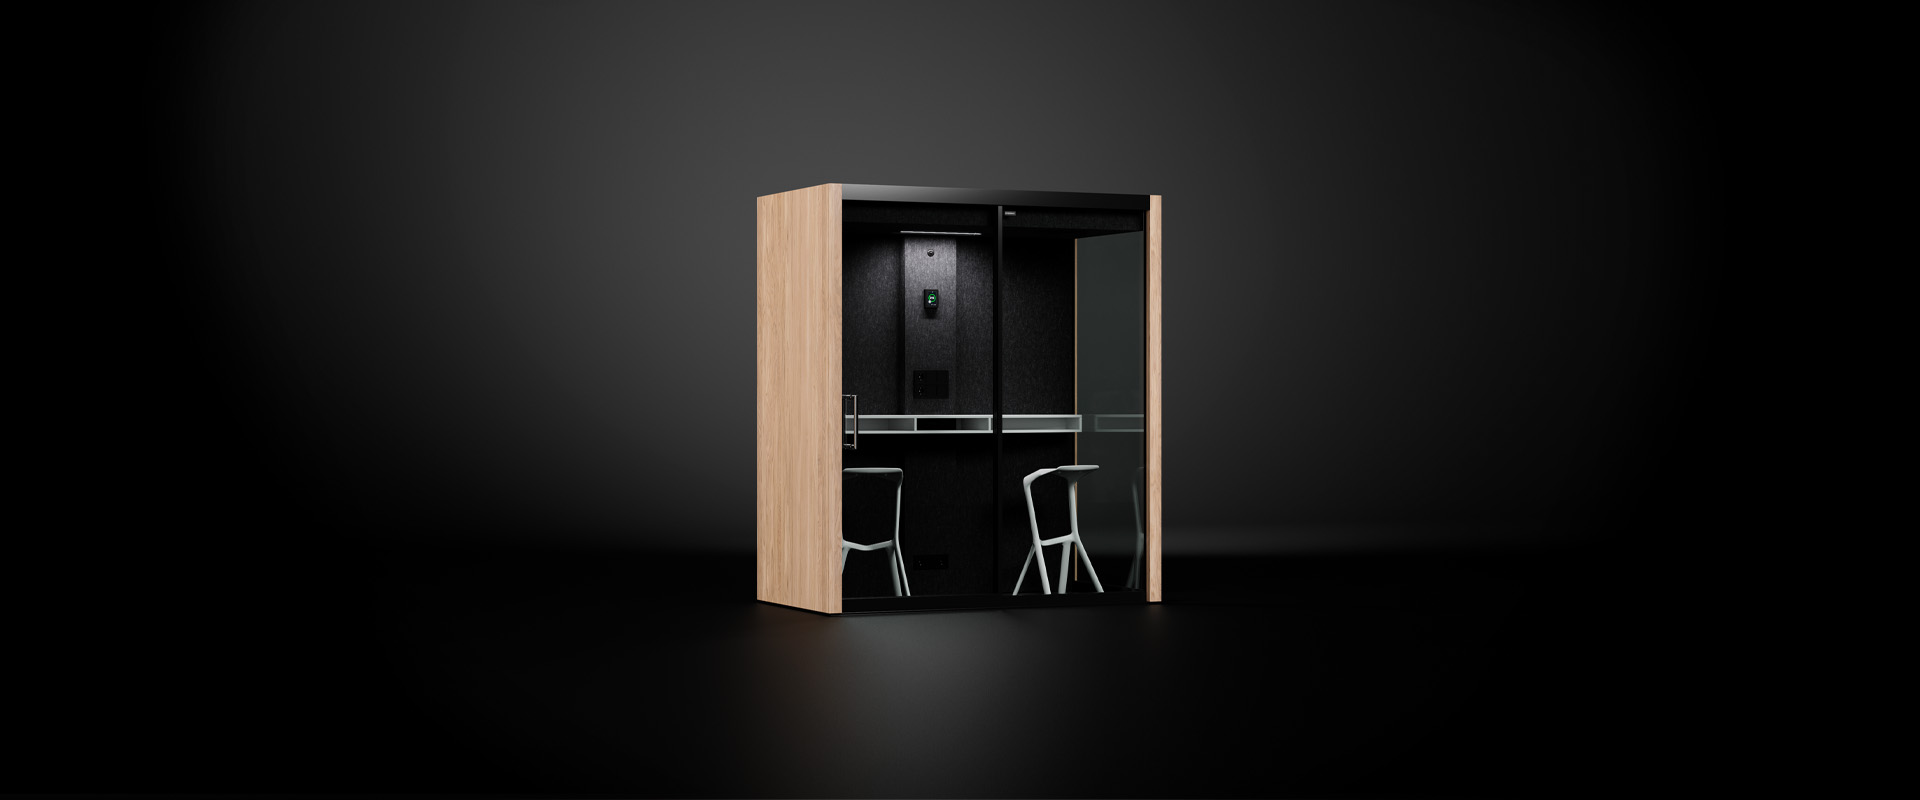 VETROSPACE S soundproof meeting pod in black background